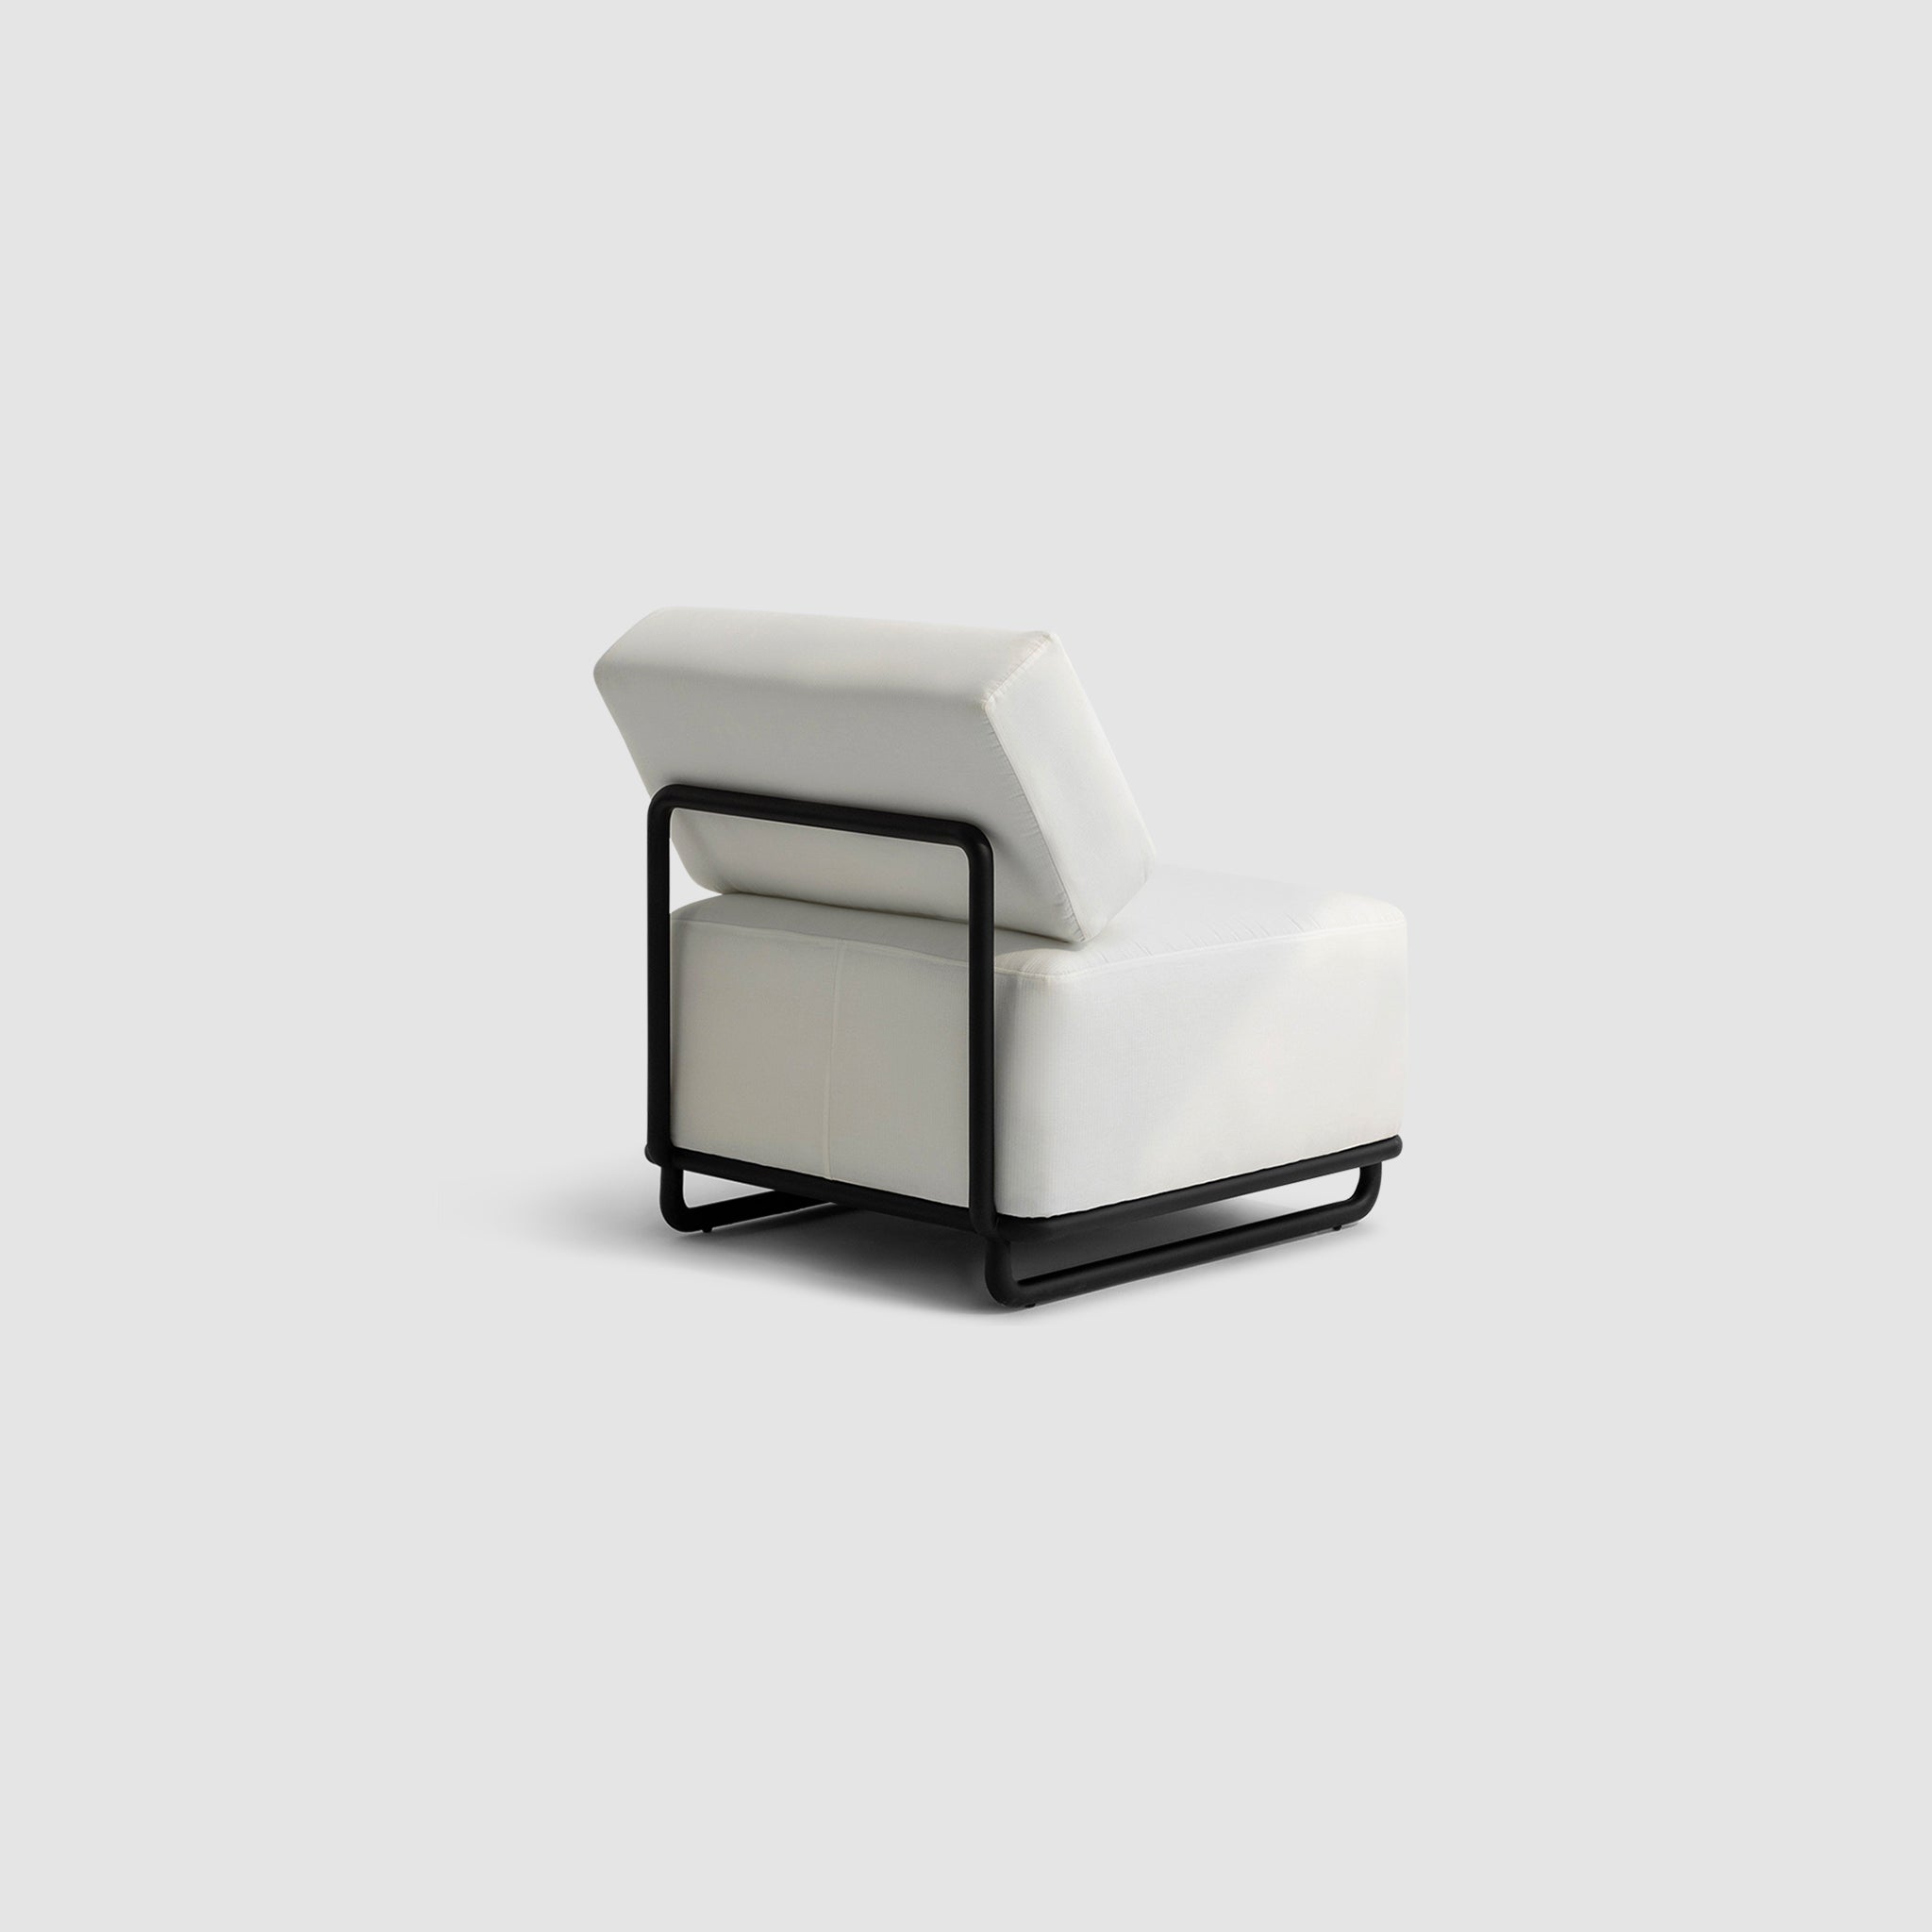 "Angled rear view of The Trevor Outdoor Modular Accent Chair featuring white cushions and a sleek black metal frame, set against a plain background."